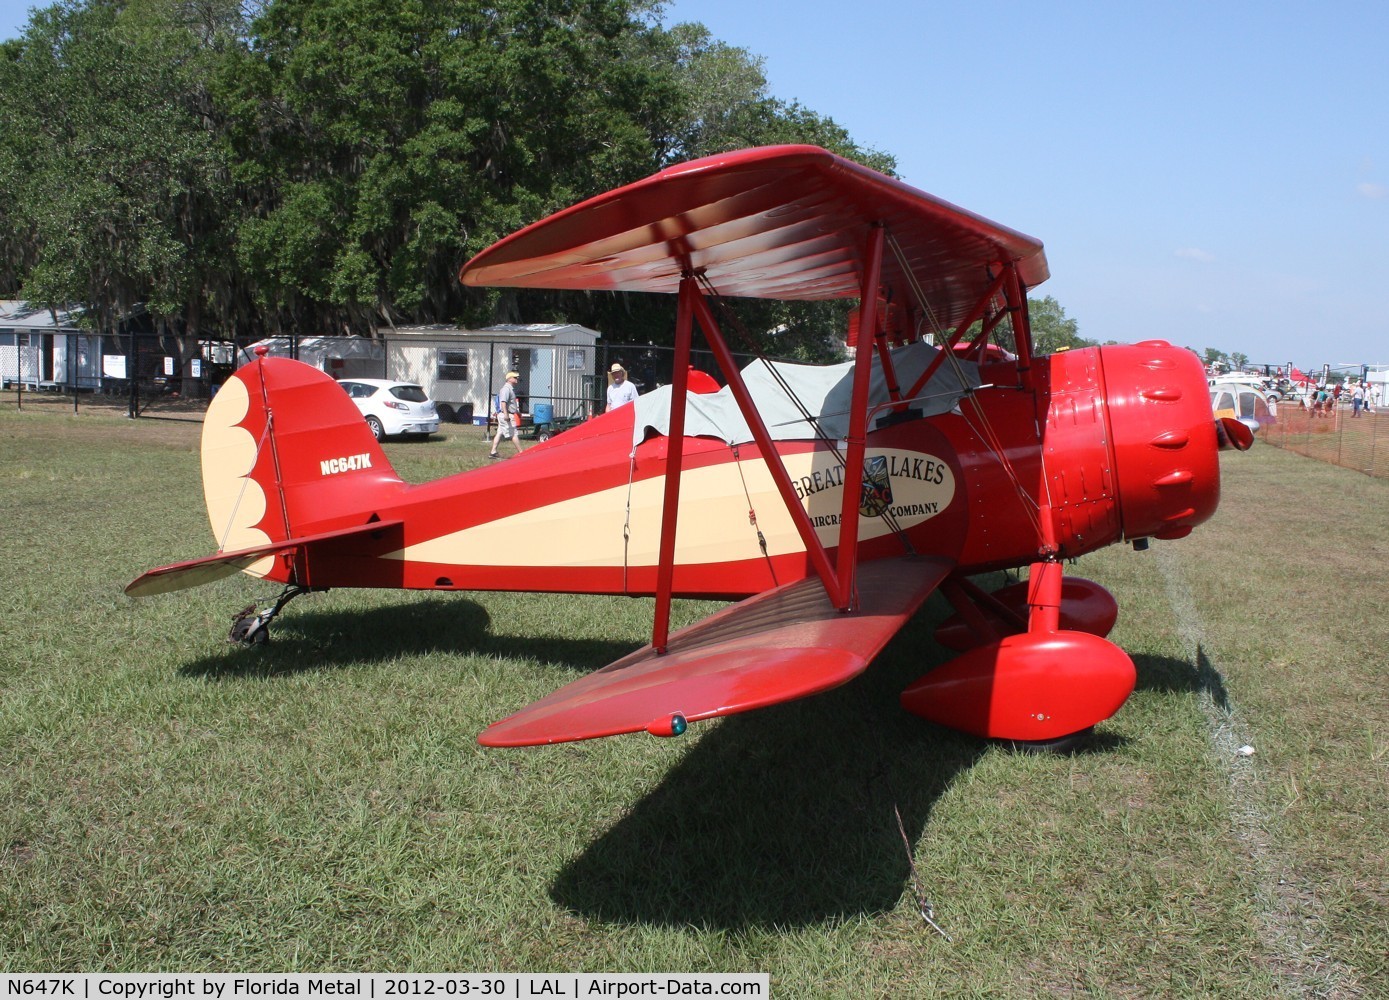 N647K, 1930 Great Lakes 2T-1A Sport Trainer C/N 111, Great Lakes 2T-1A